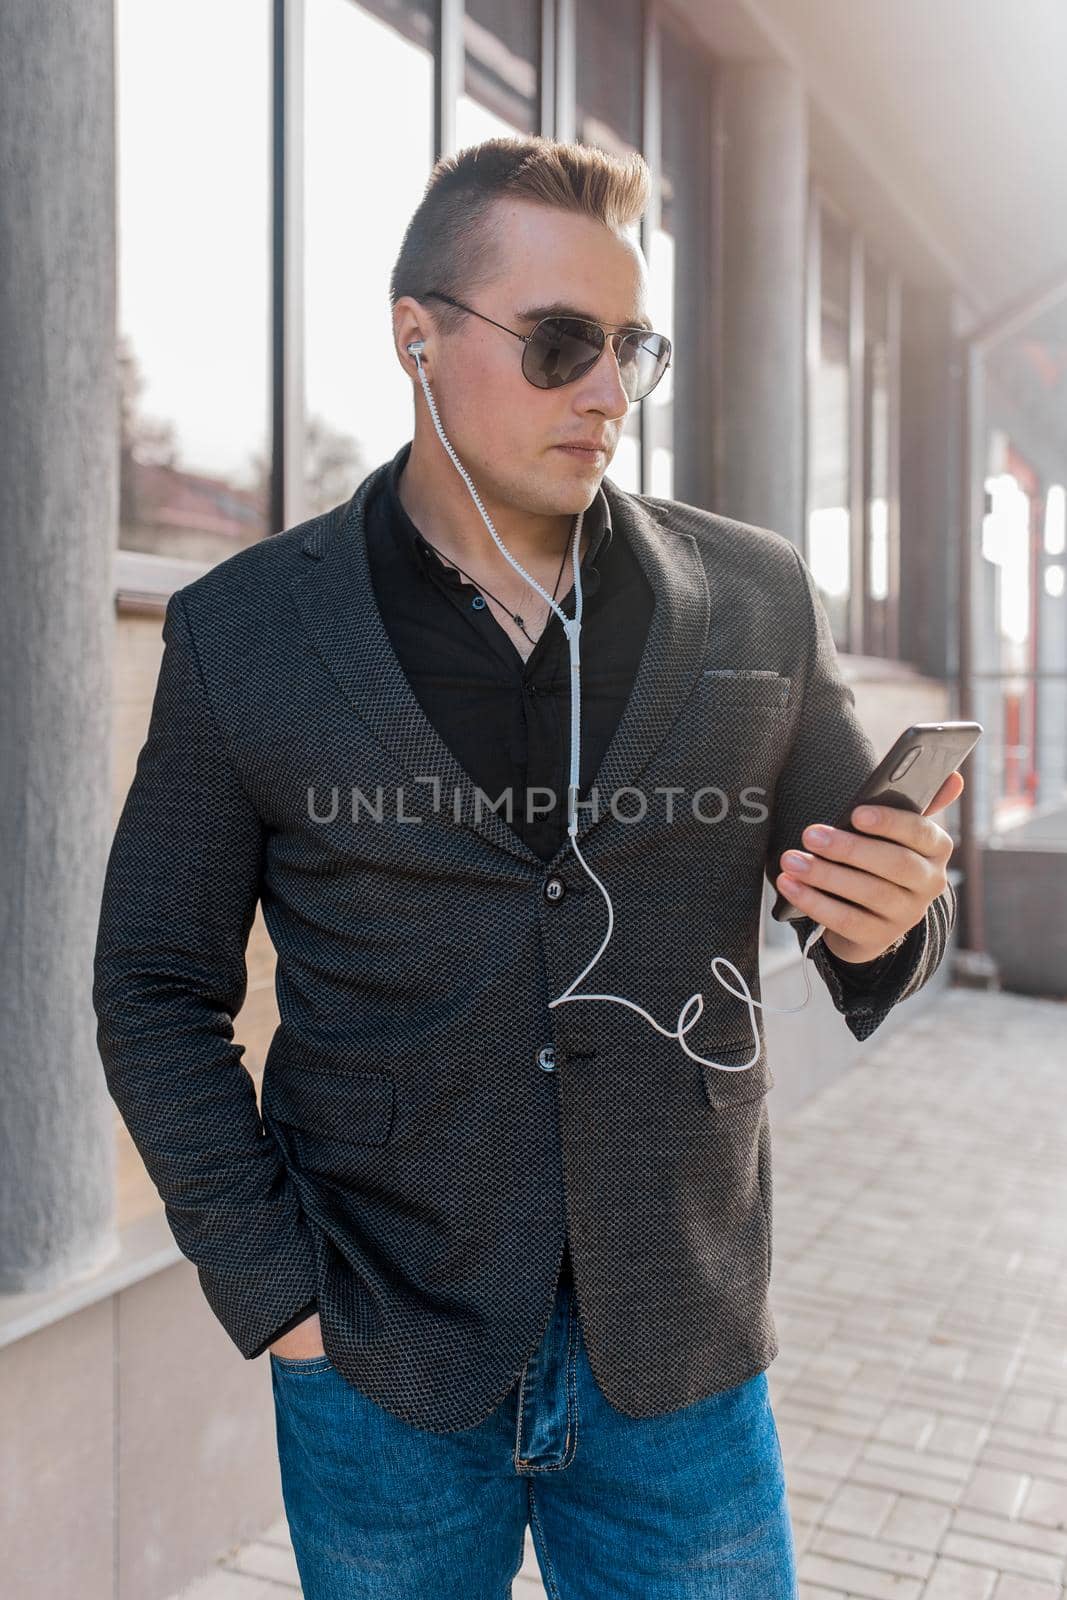 Portrait of a young business man in sunglasses, jacket and shirt with jeans and headphones listening to music from a mobile phone in the street outdoors.